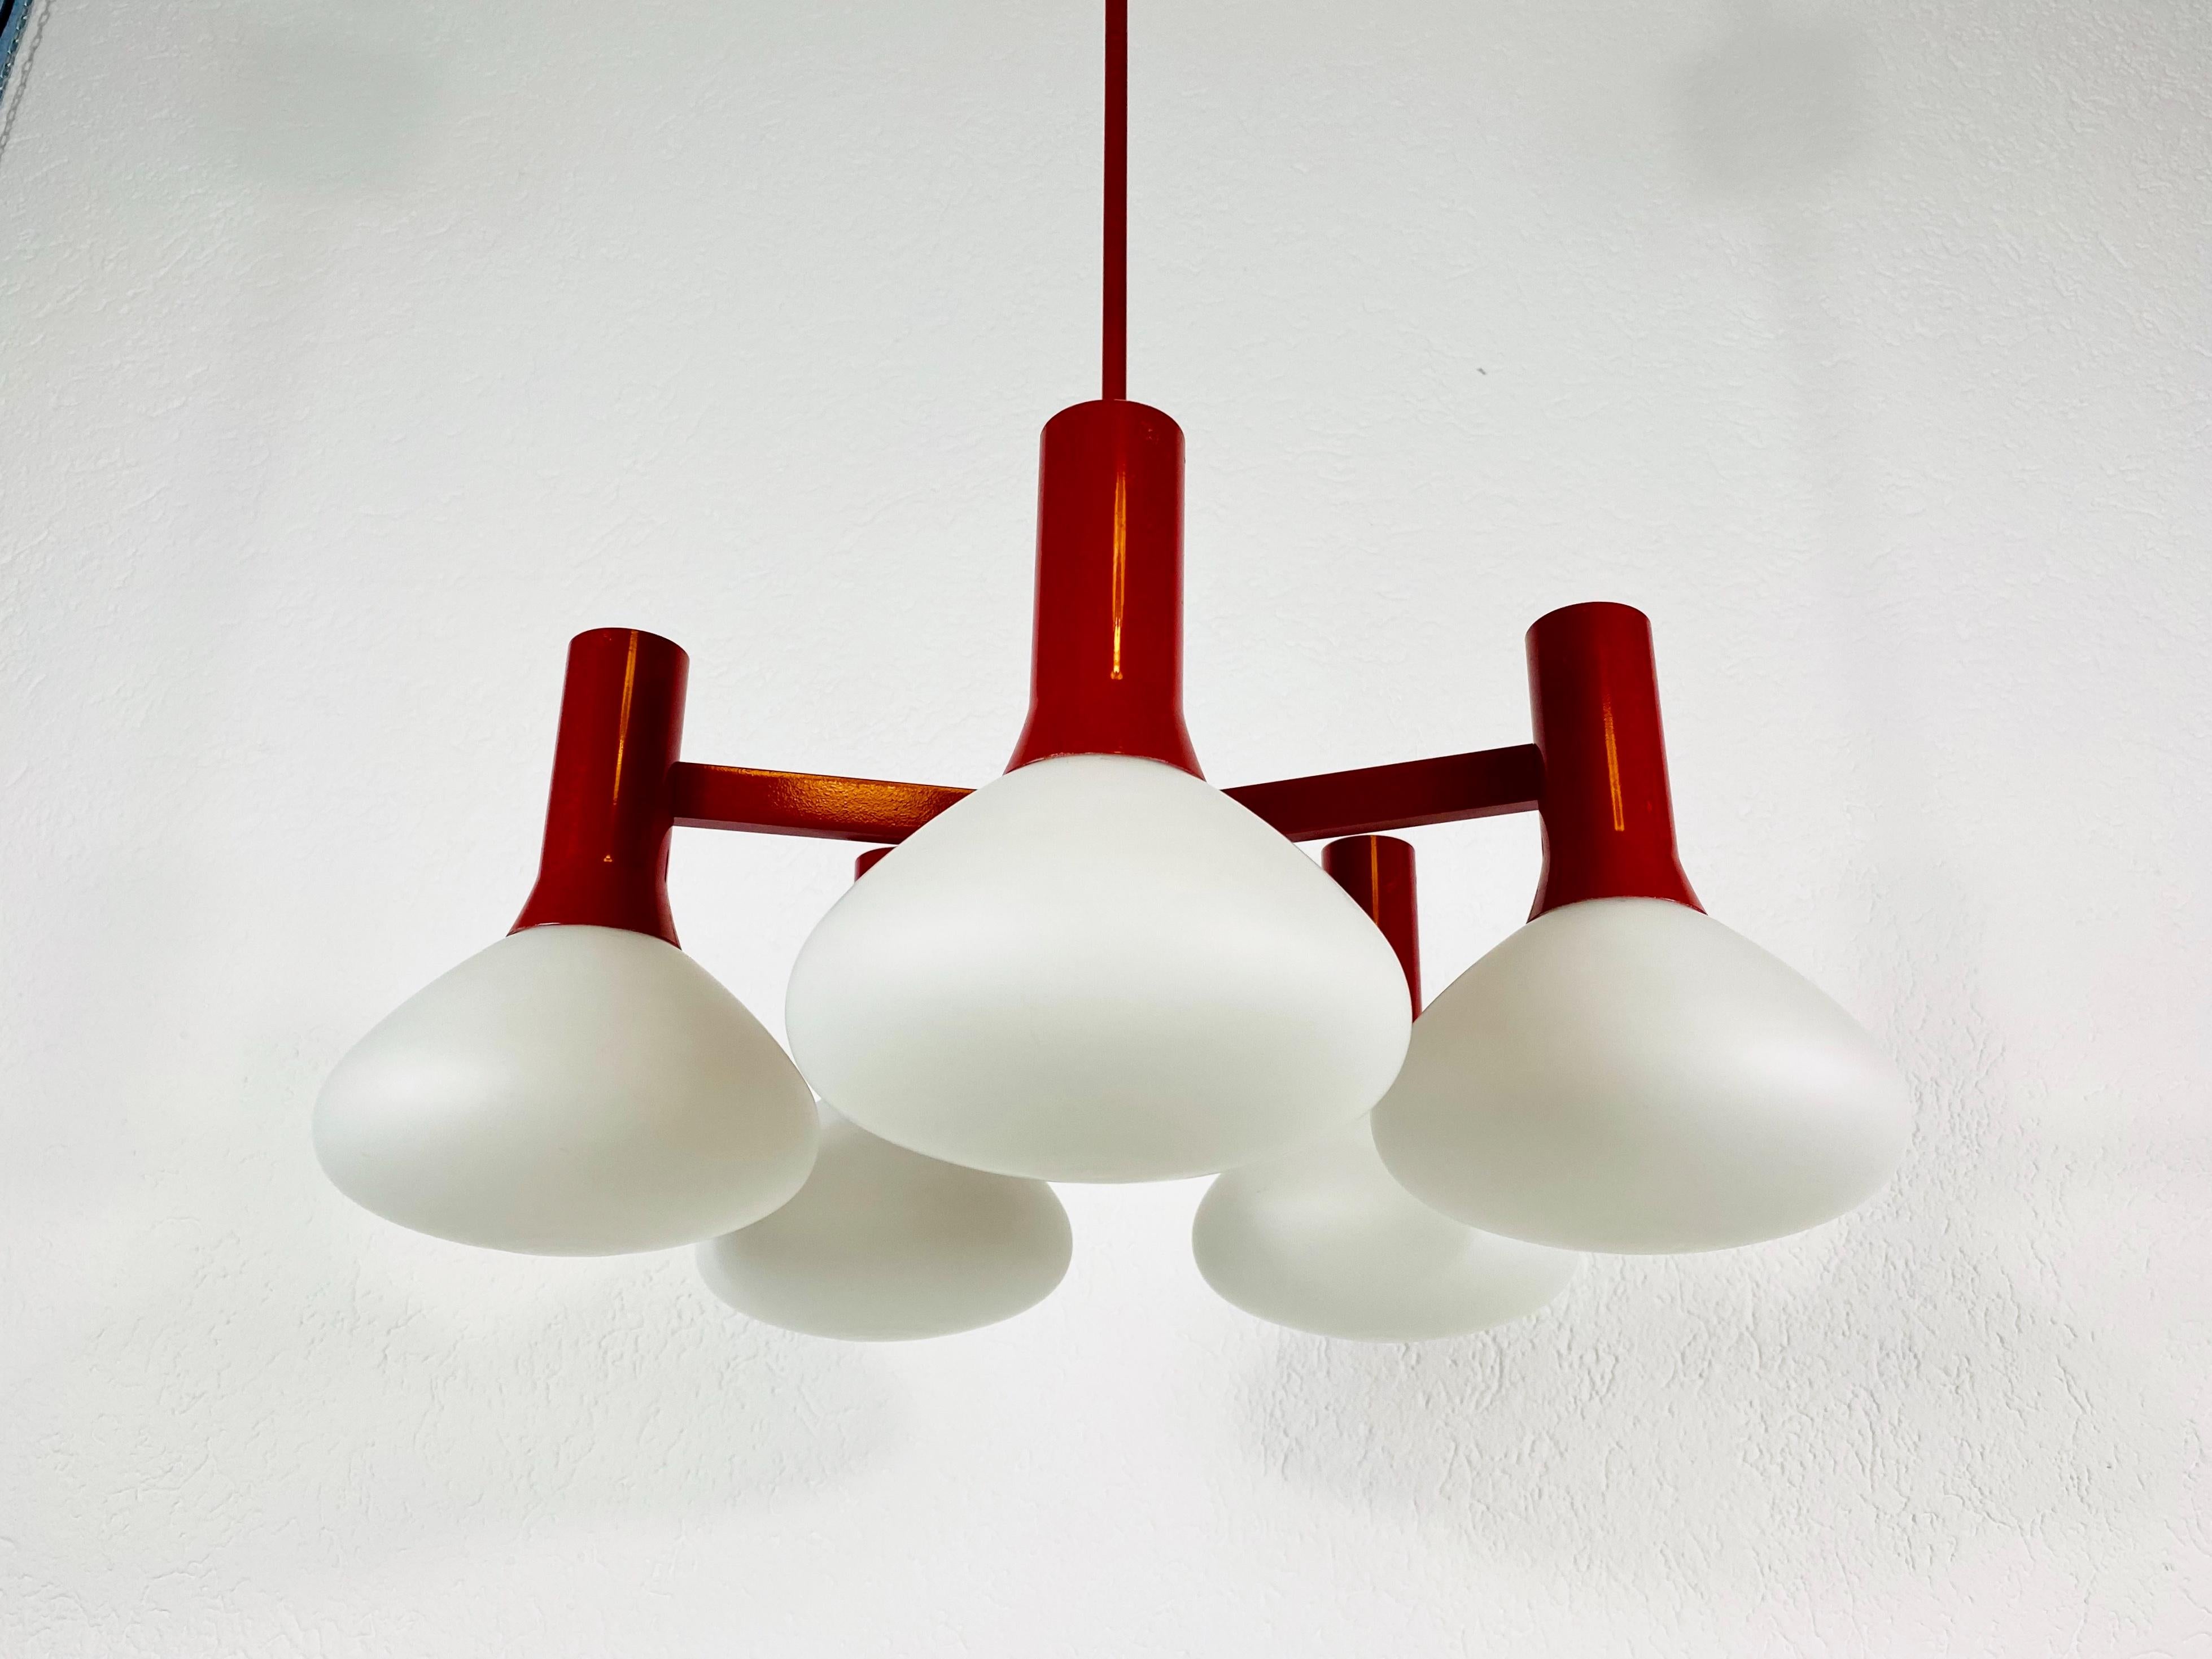 A midcentury chandelier by Kaiser made in Germany in the 1960s. It is fascinating with its Space Age design and five opaque balls. The red circular body of the light is made of full metal, including the arms.


The light requires 5 E14 light